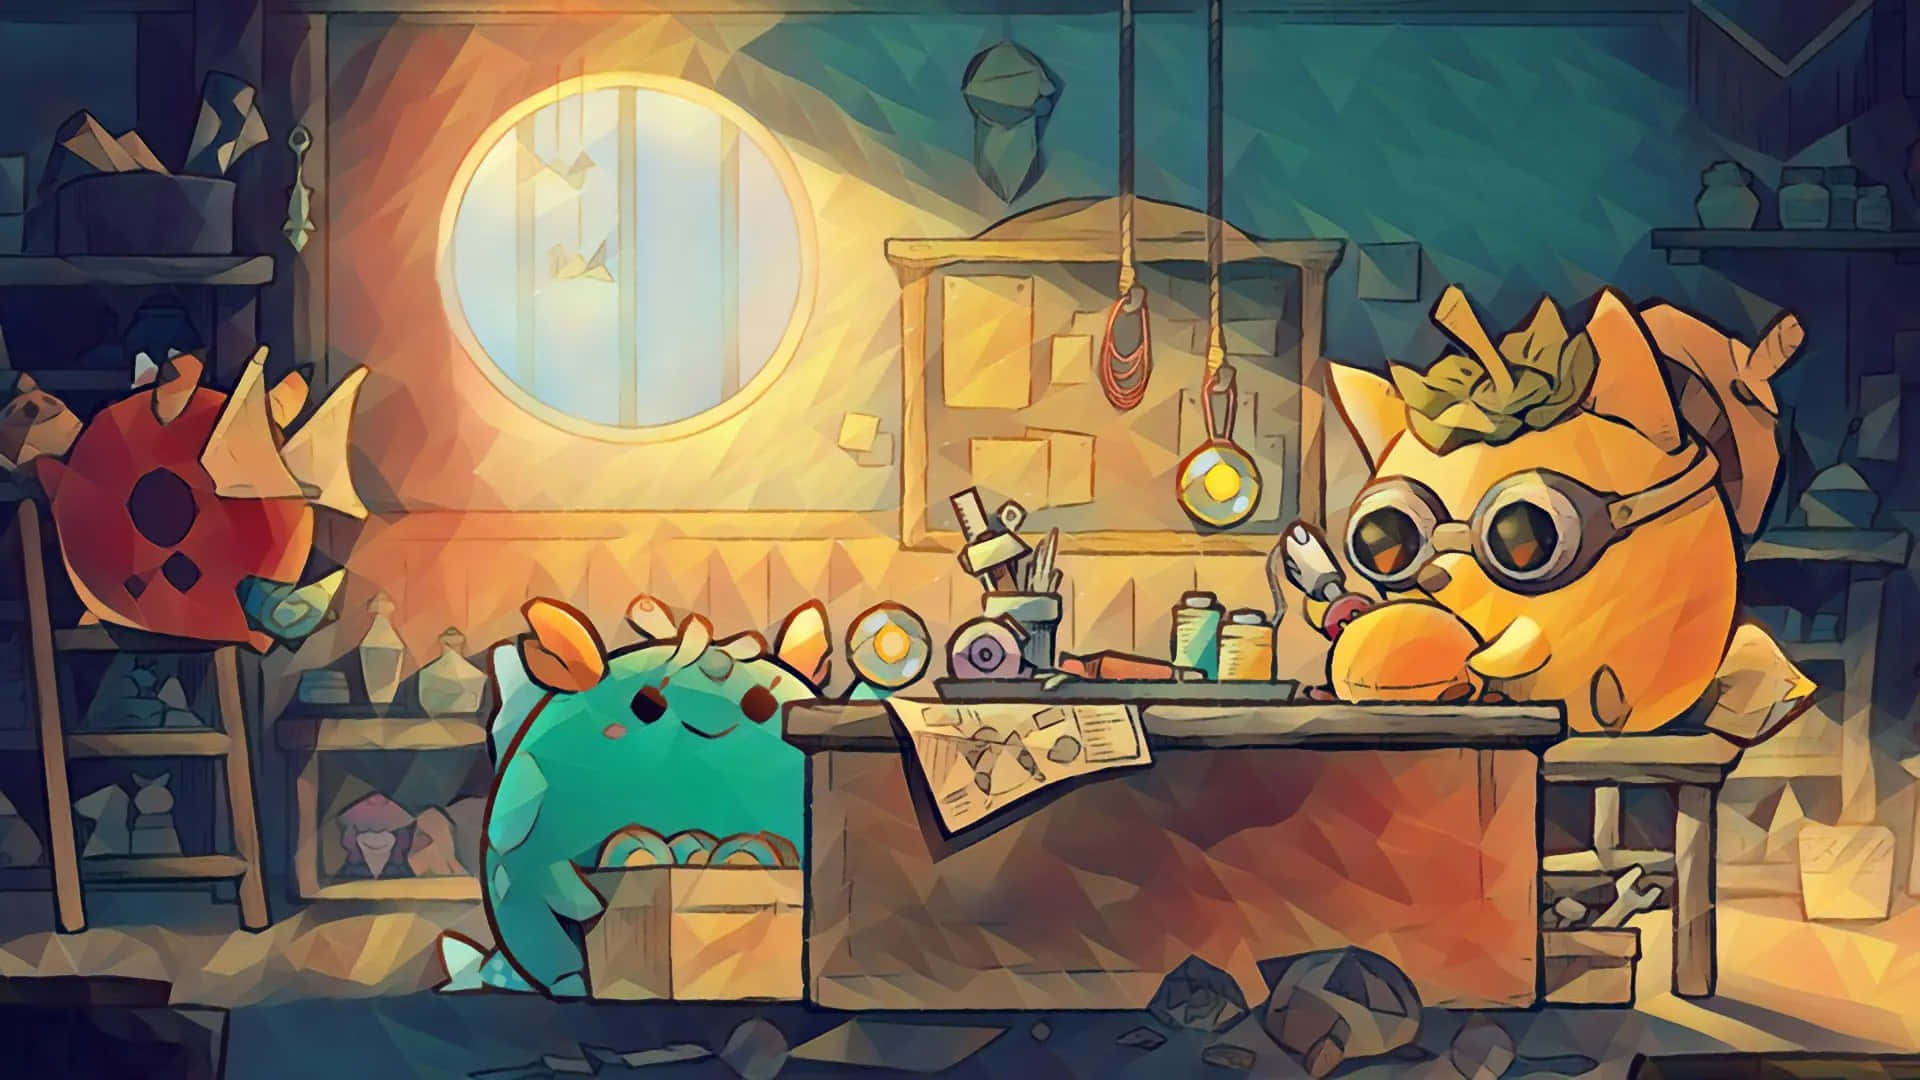 Battle Your Way Through a Fantasy World with Axie Infinity